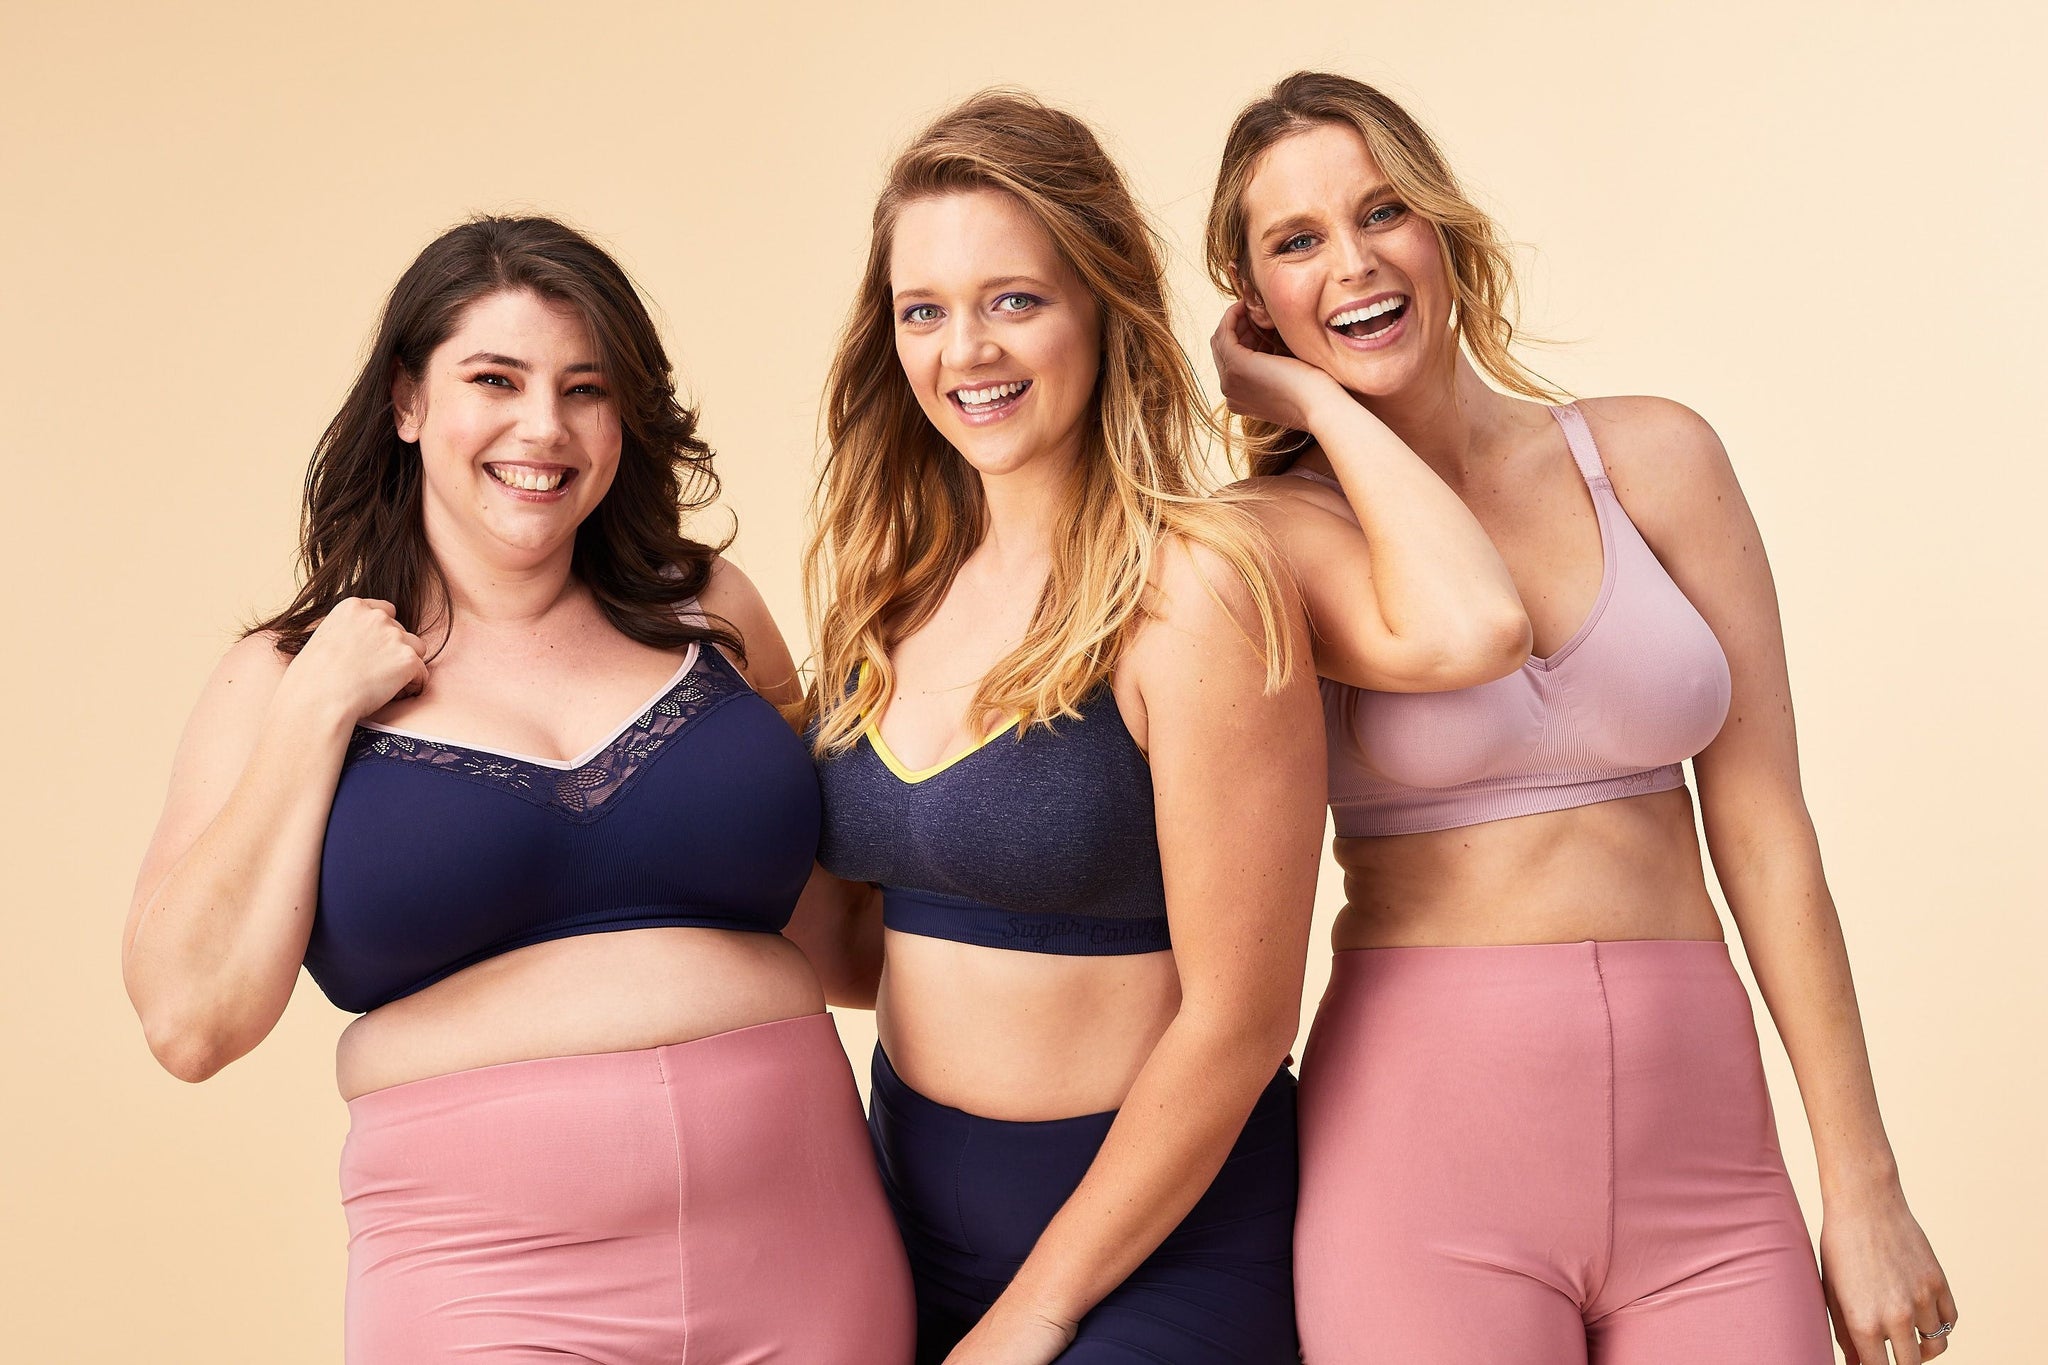 You can wear this new bra all day without any discomfort! - Curvy Bras